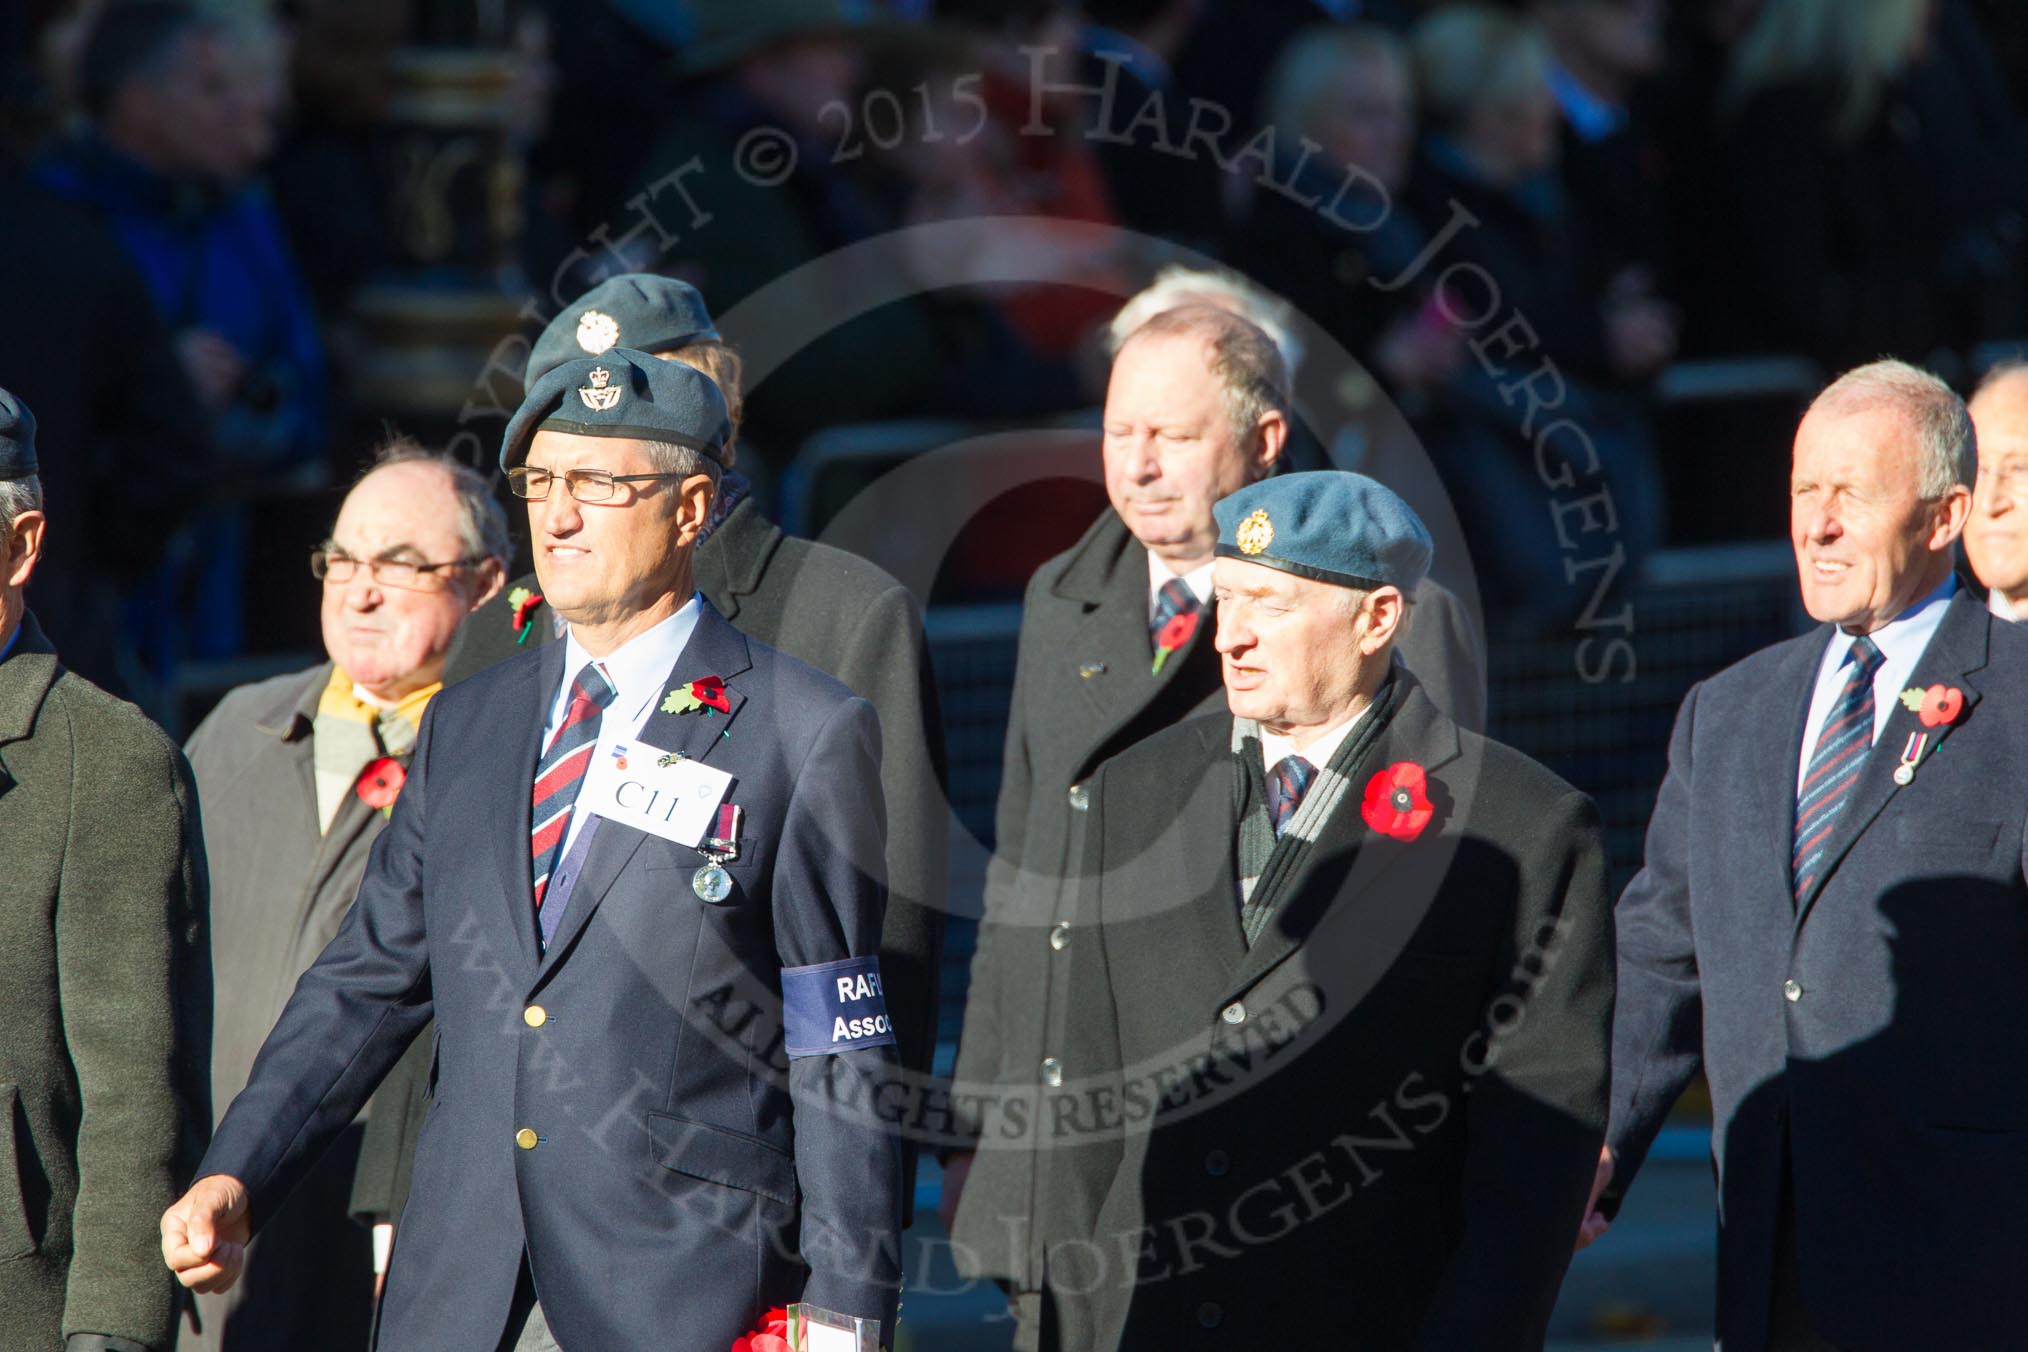 Remembrance Sunday Cenotaph March Past 2013: C11 - RAFLING Association..
Press stand opposite the Foreign Office building, Whitehall, London SW1,
London,
Greater London,
United Kingdom,
on 10 November 2013 at 12:07, image #1779